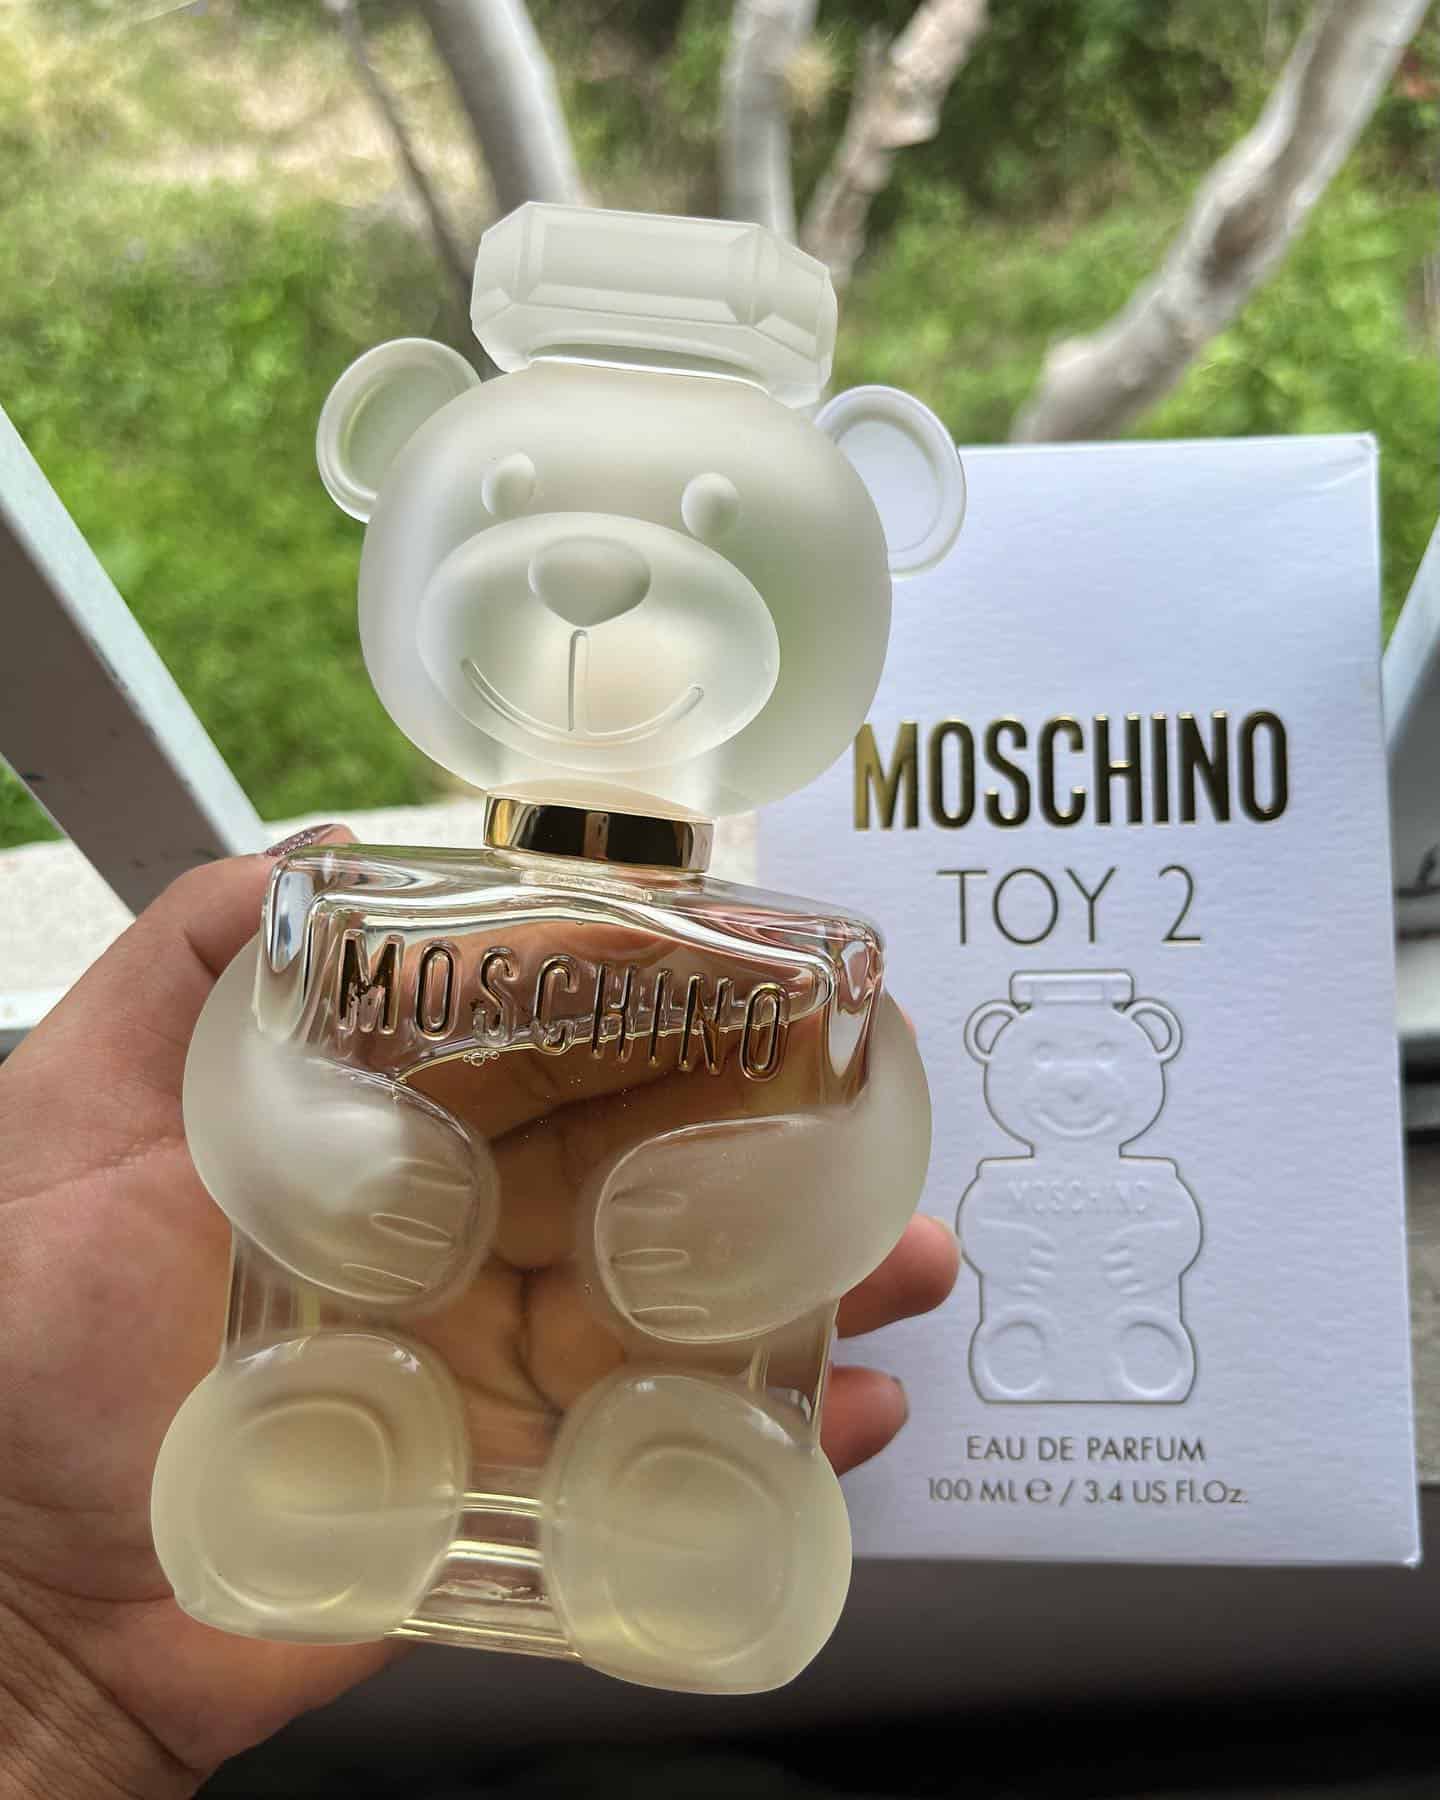 holding a bottle of moschino toy 2 cologne